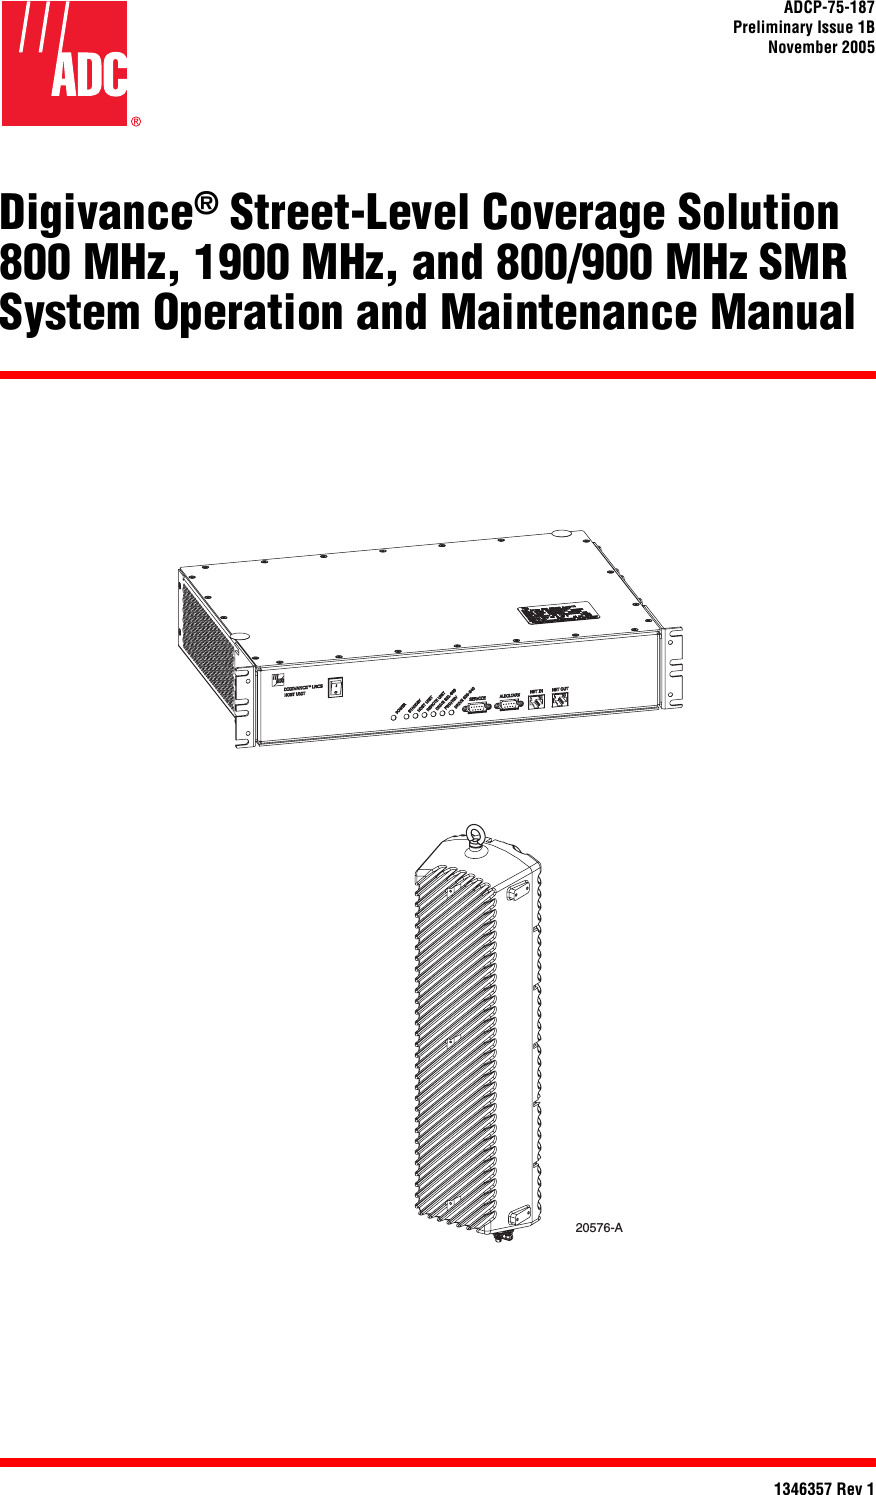 ADCP-75-187Preliminary Issue 1BNovember 20051346357 Rev 1Digivance® Street-Level Coverage Solution 800 MHz, 1900 MHz, and 800/900 MHz SMR System Operation and Maintenance Manual20576-A